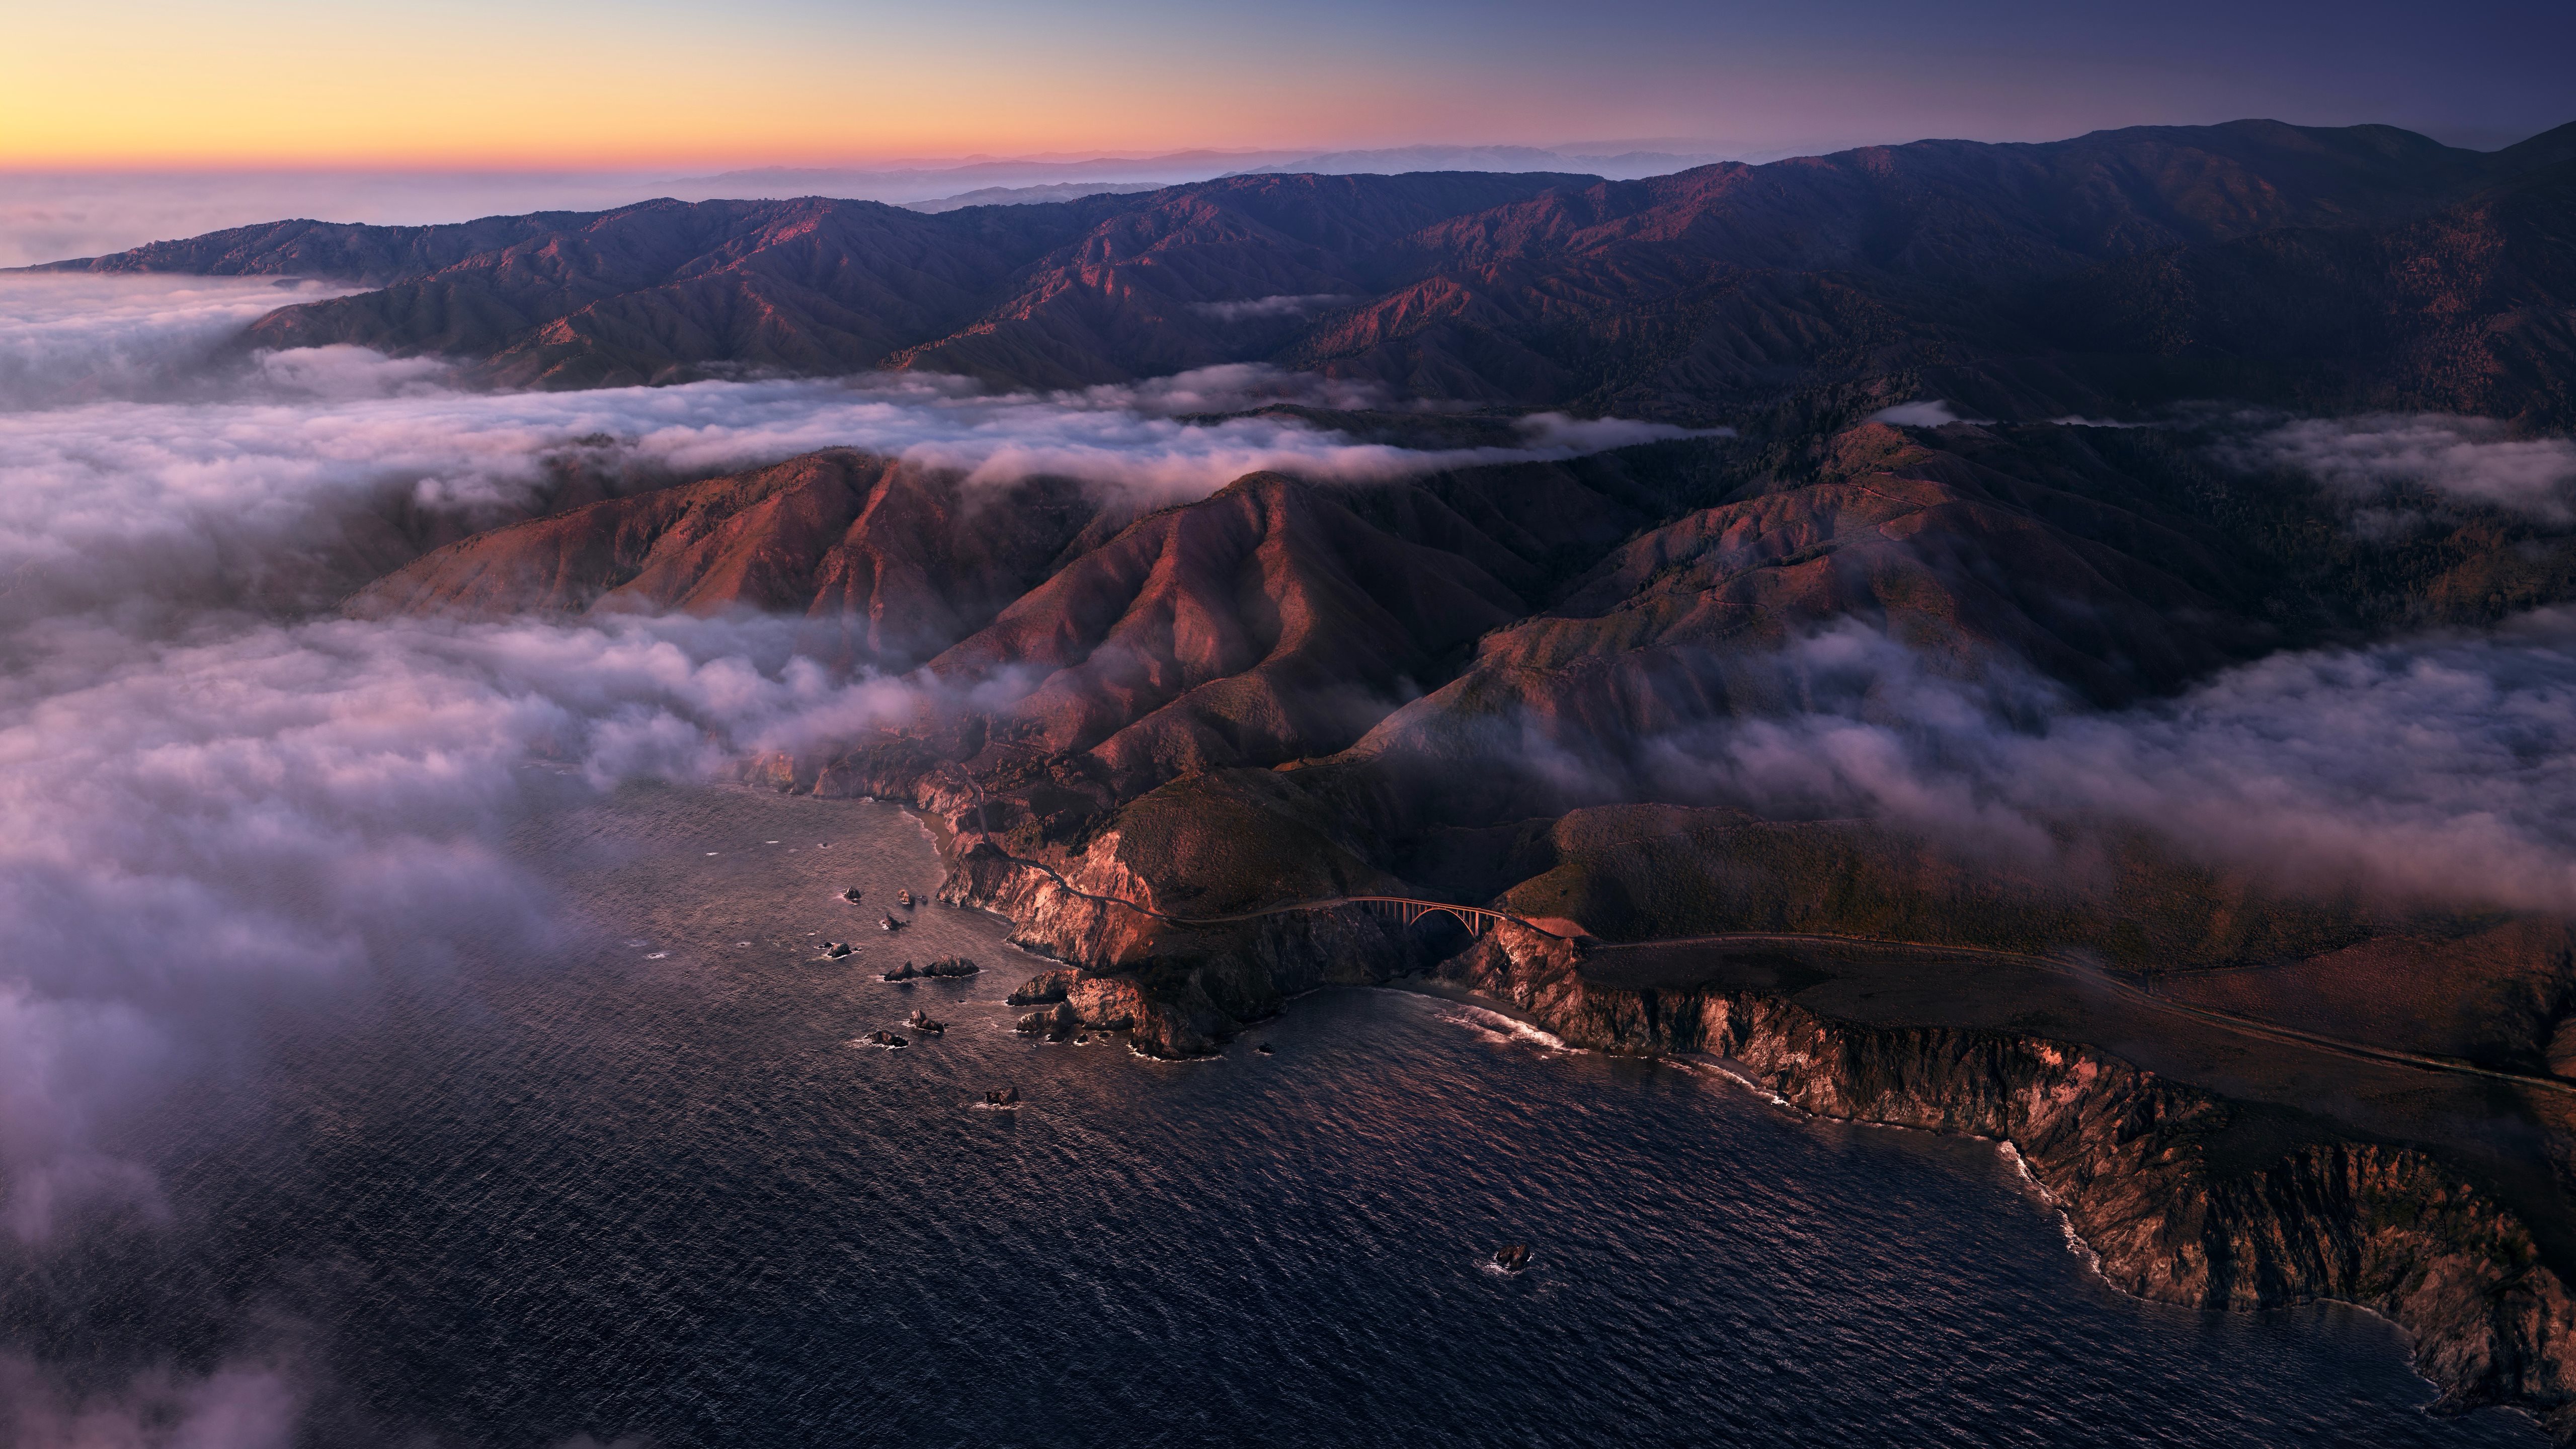 General 5120x2880 Big Sur water sea landscape mountains rocks nature clouds aerial view sky coast USA